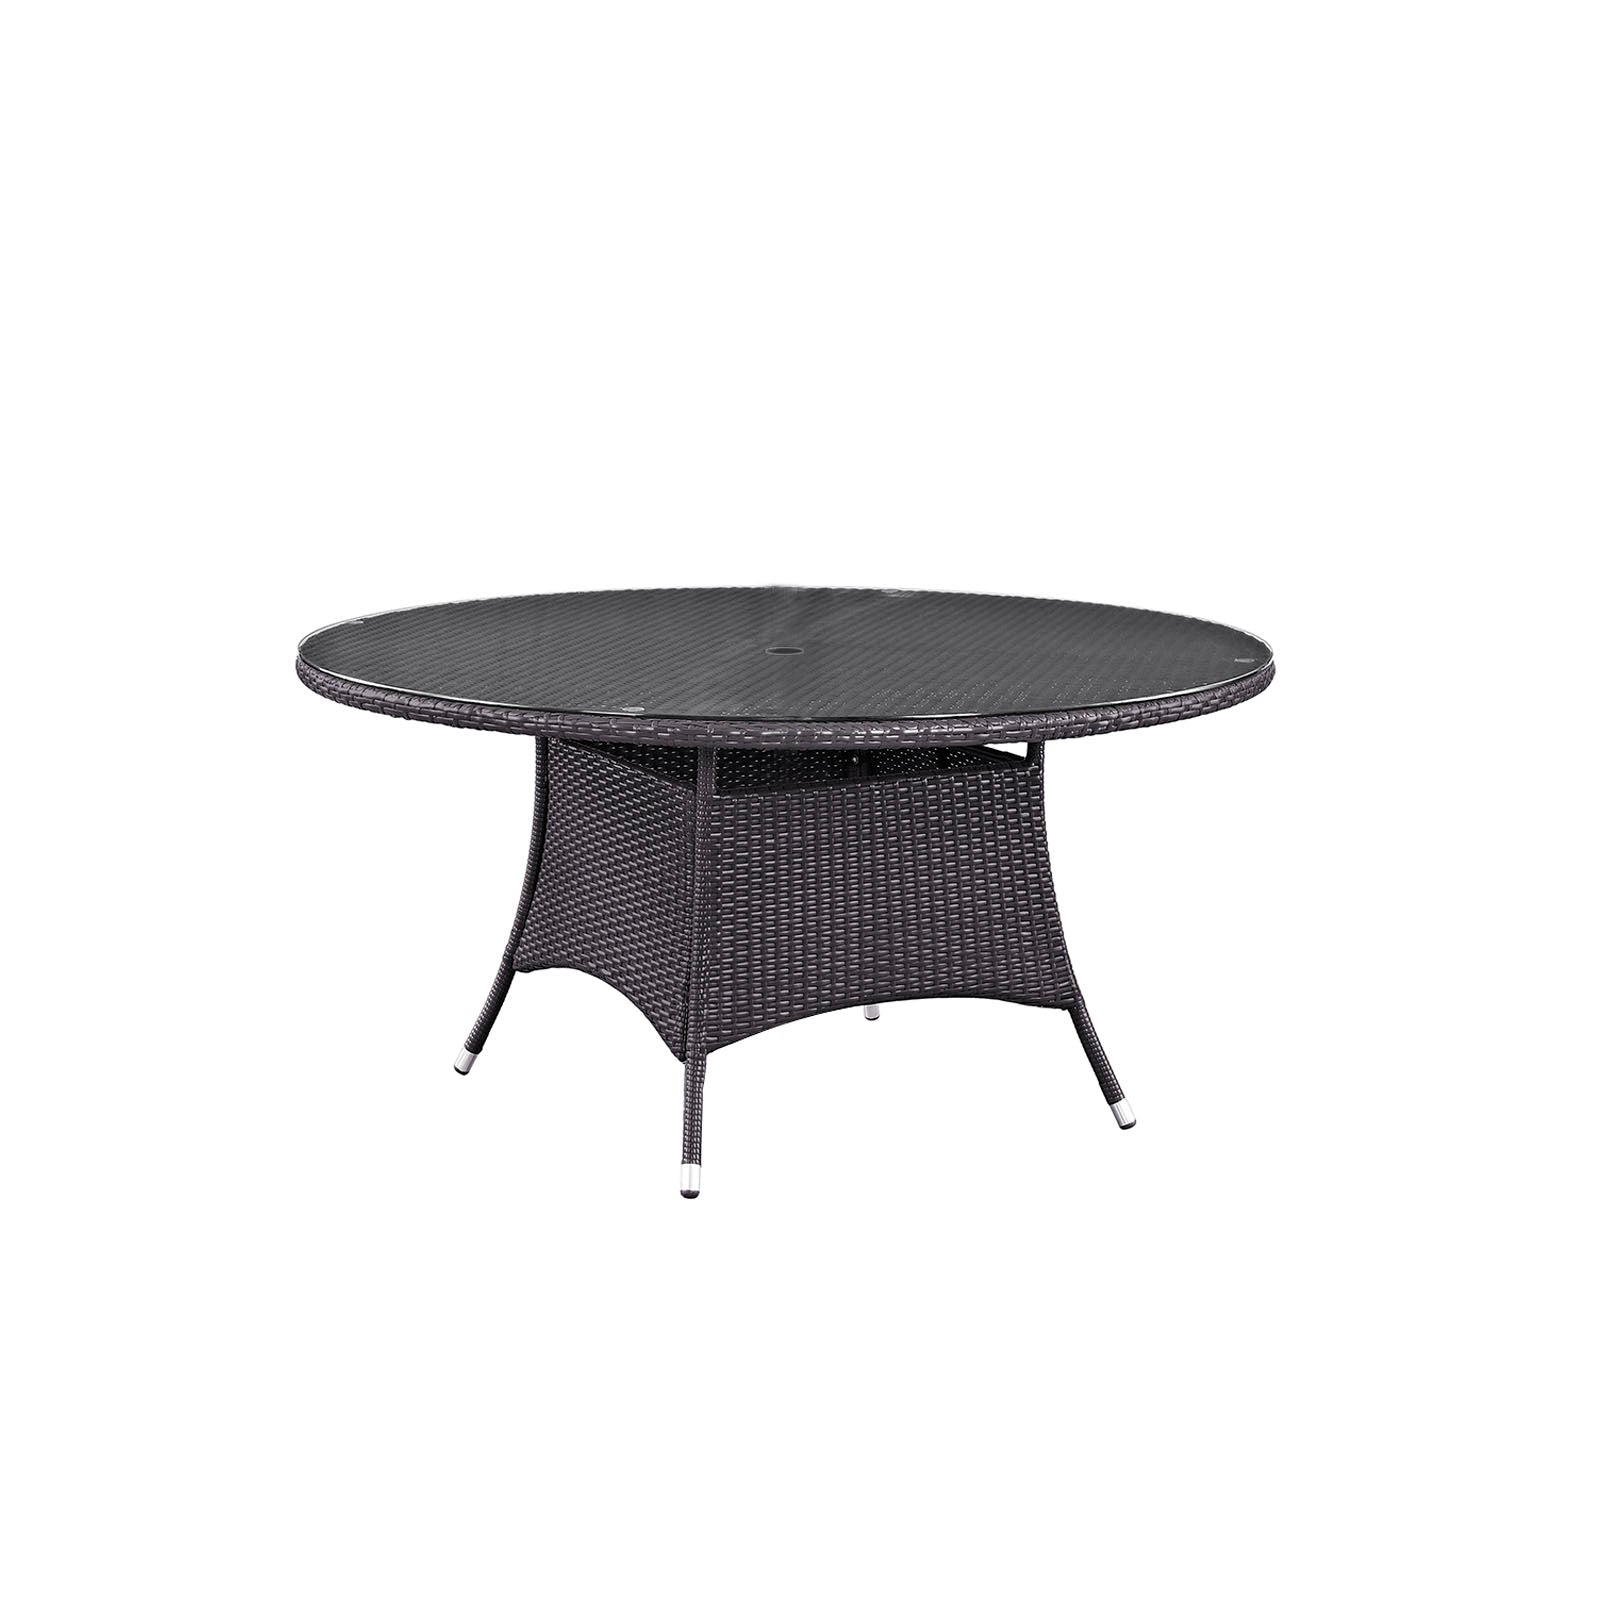 Convene 59" Round Outdoor Patio Dining Table - East Shore Modern Home Furnishings